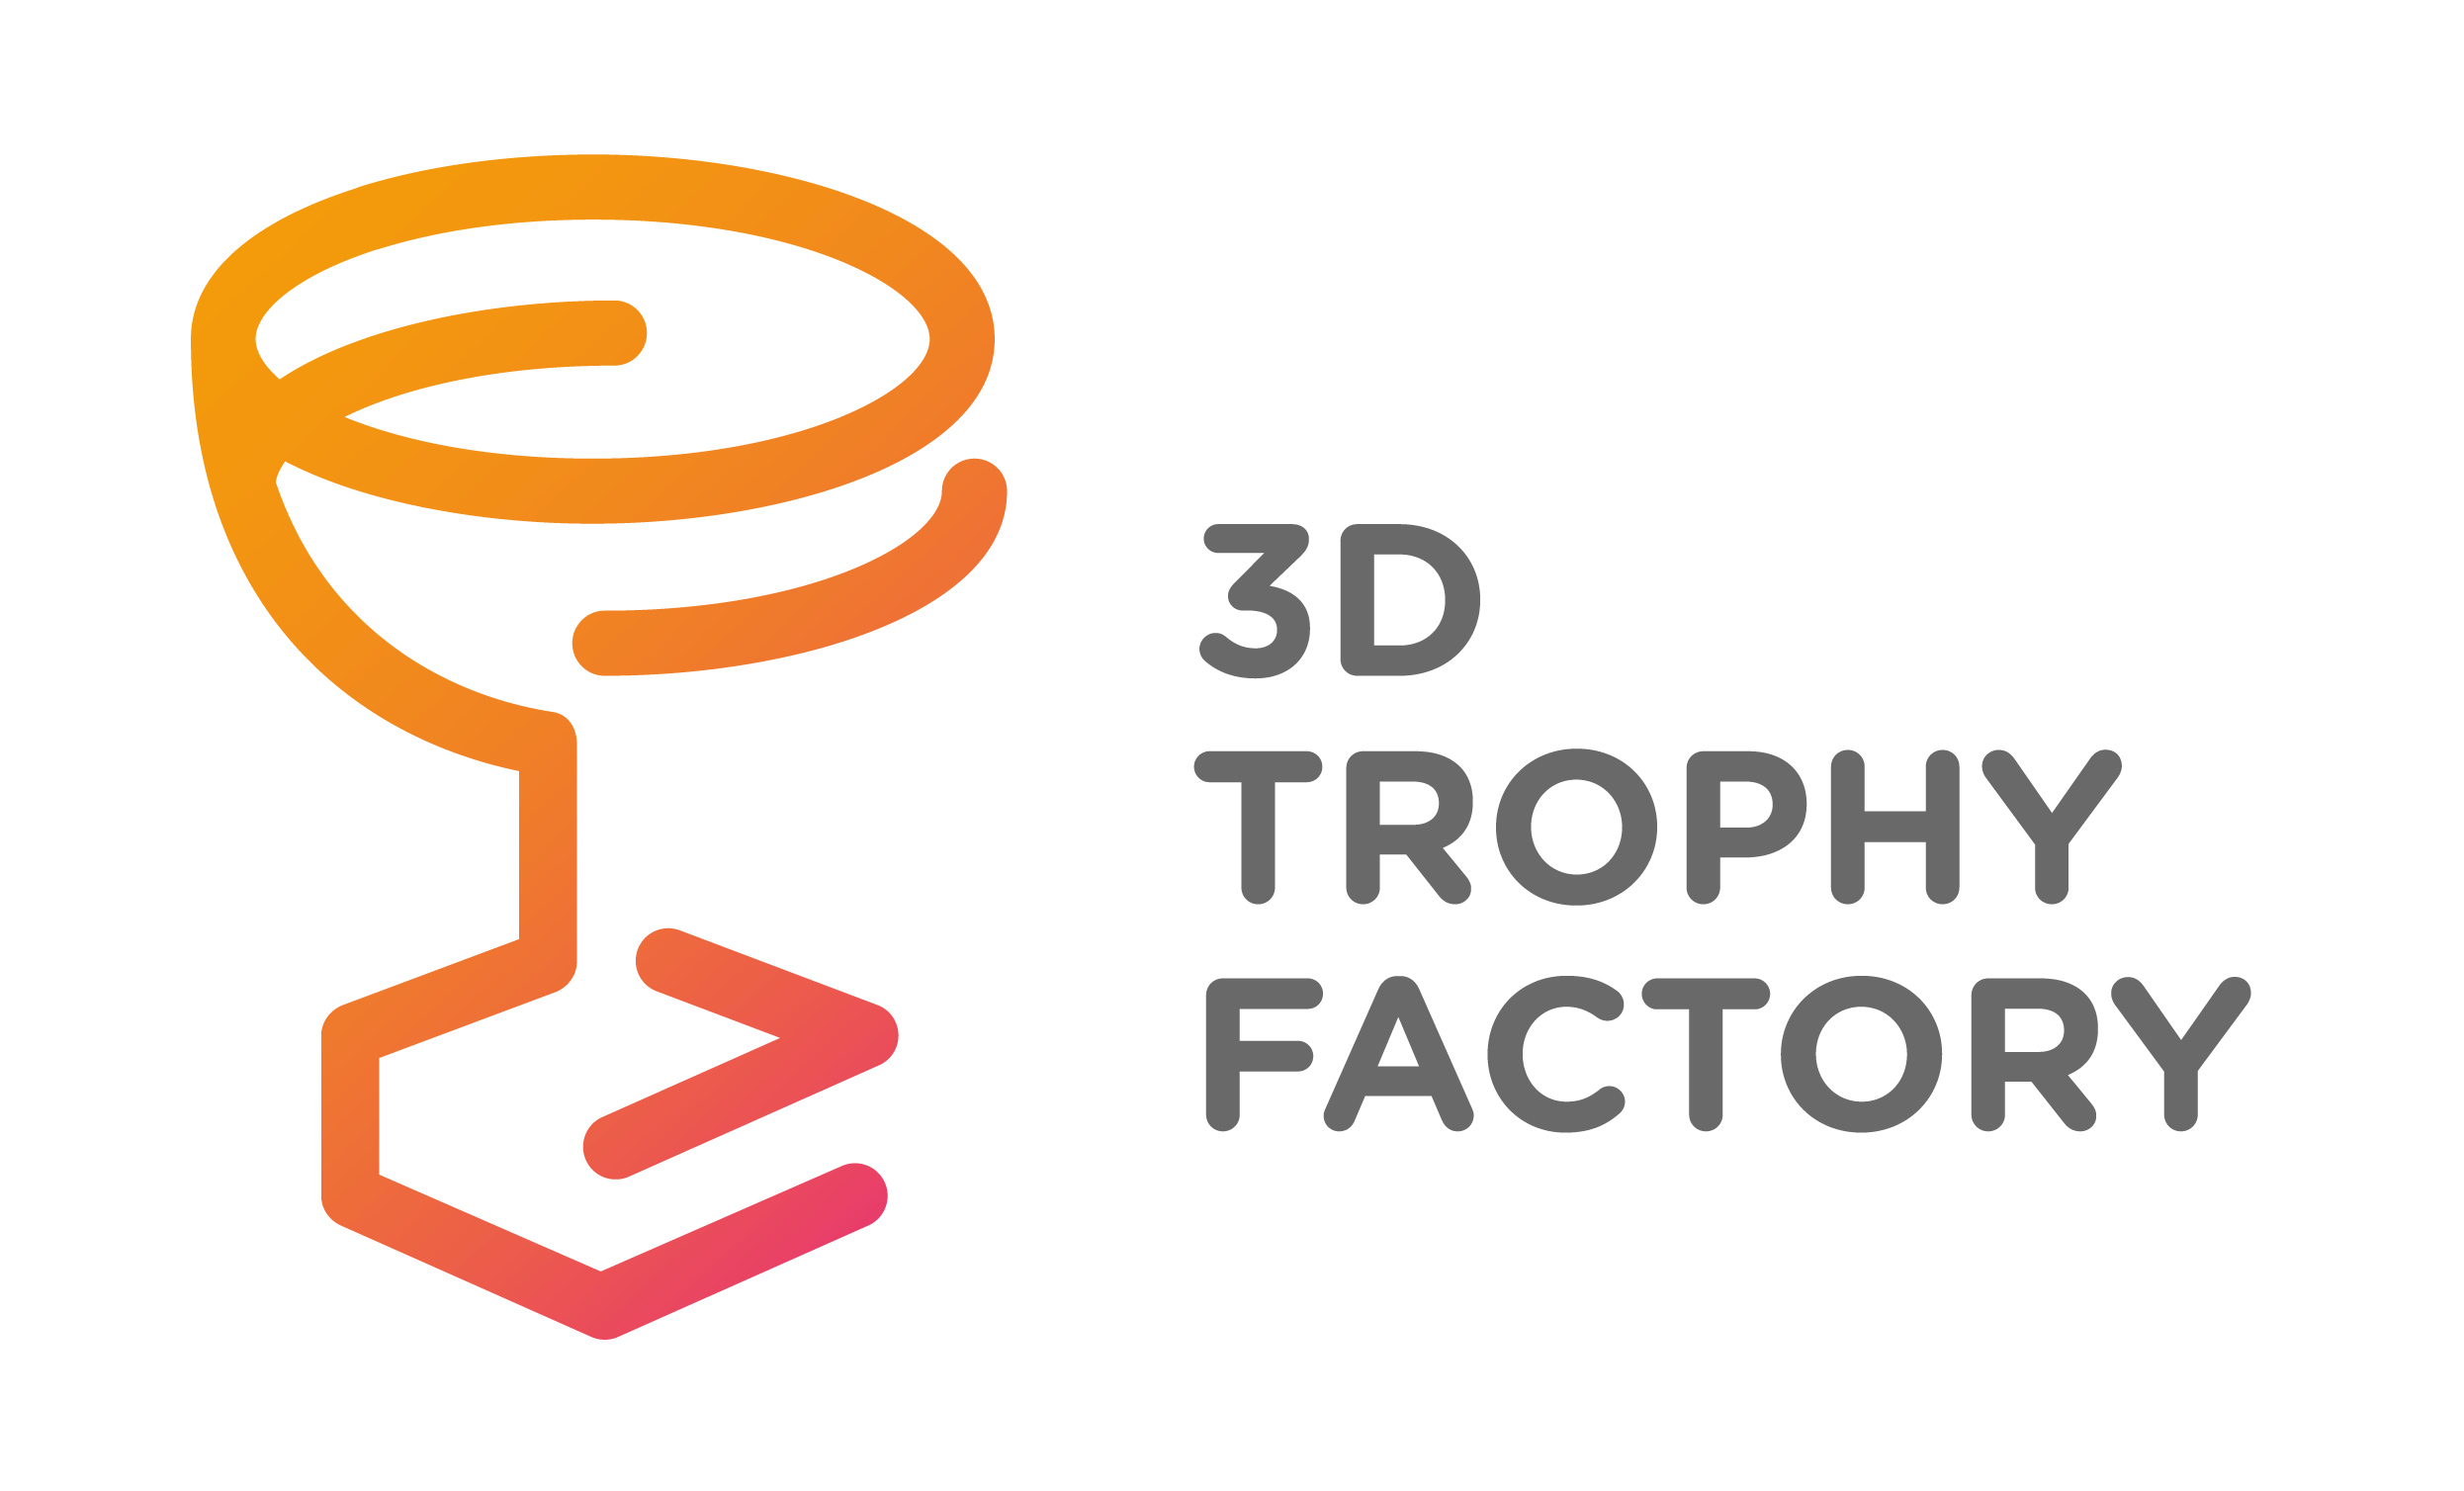 Trophy Logo - Check out our new trophy logo and website! - 3Dtrophyfactory